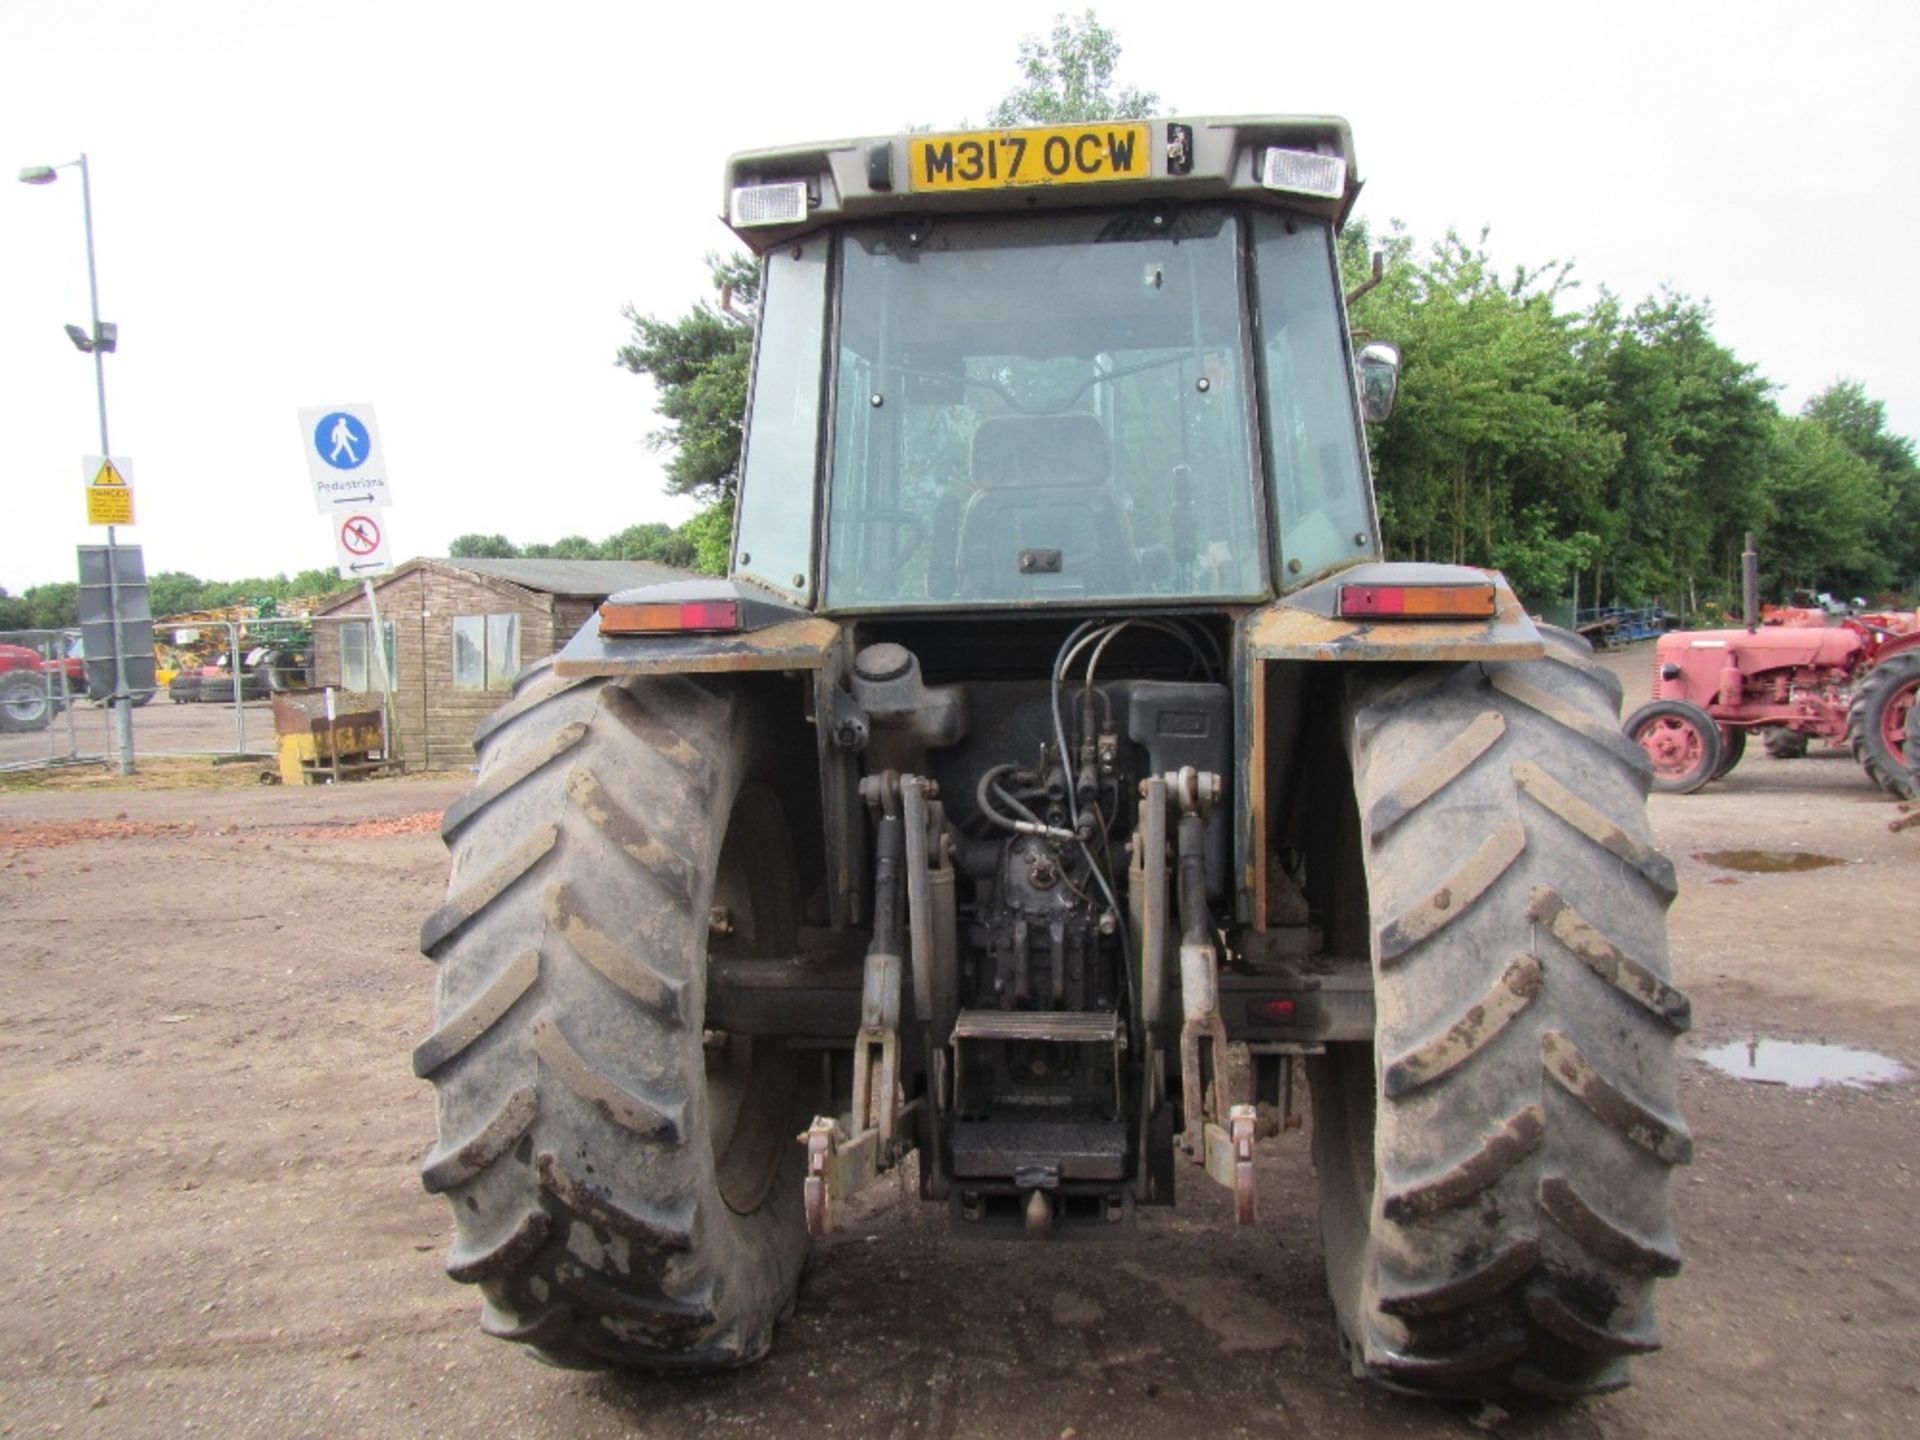 1994 Massey Ferguson 3090 4wd Tractor with Front Loader. Reg. No. M317 OCW Ser. No. C201010 - Image 6 of 17